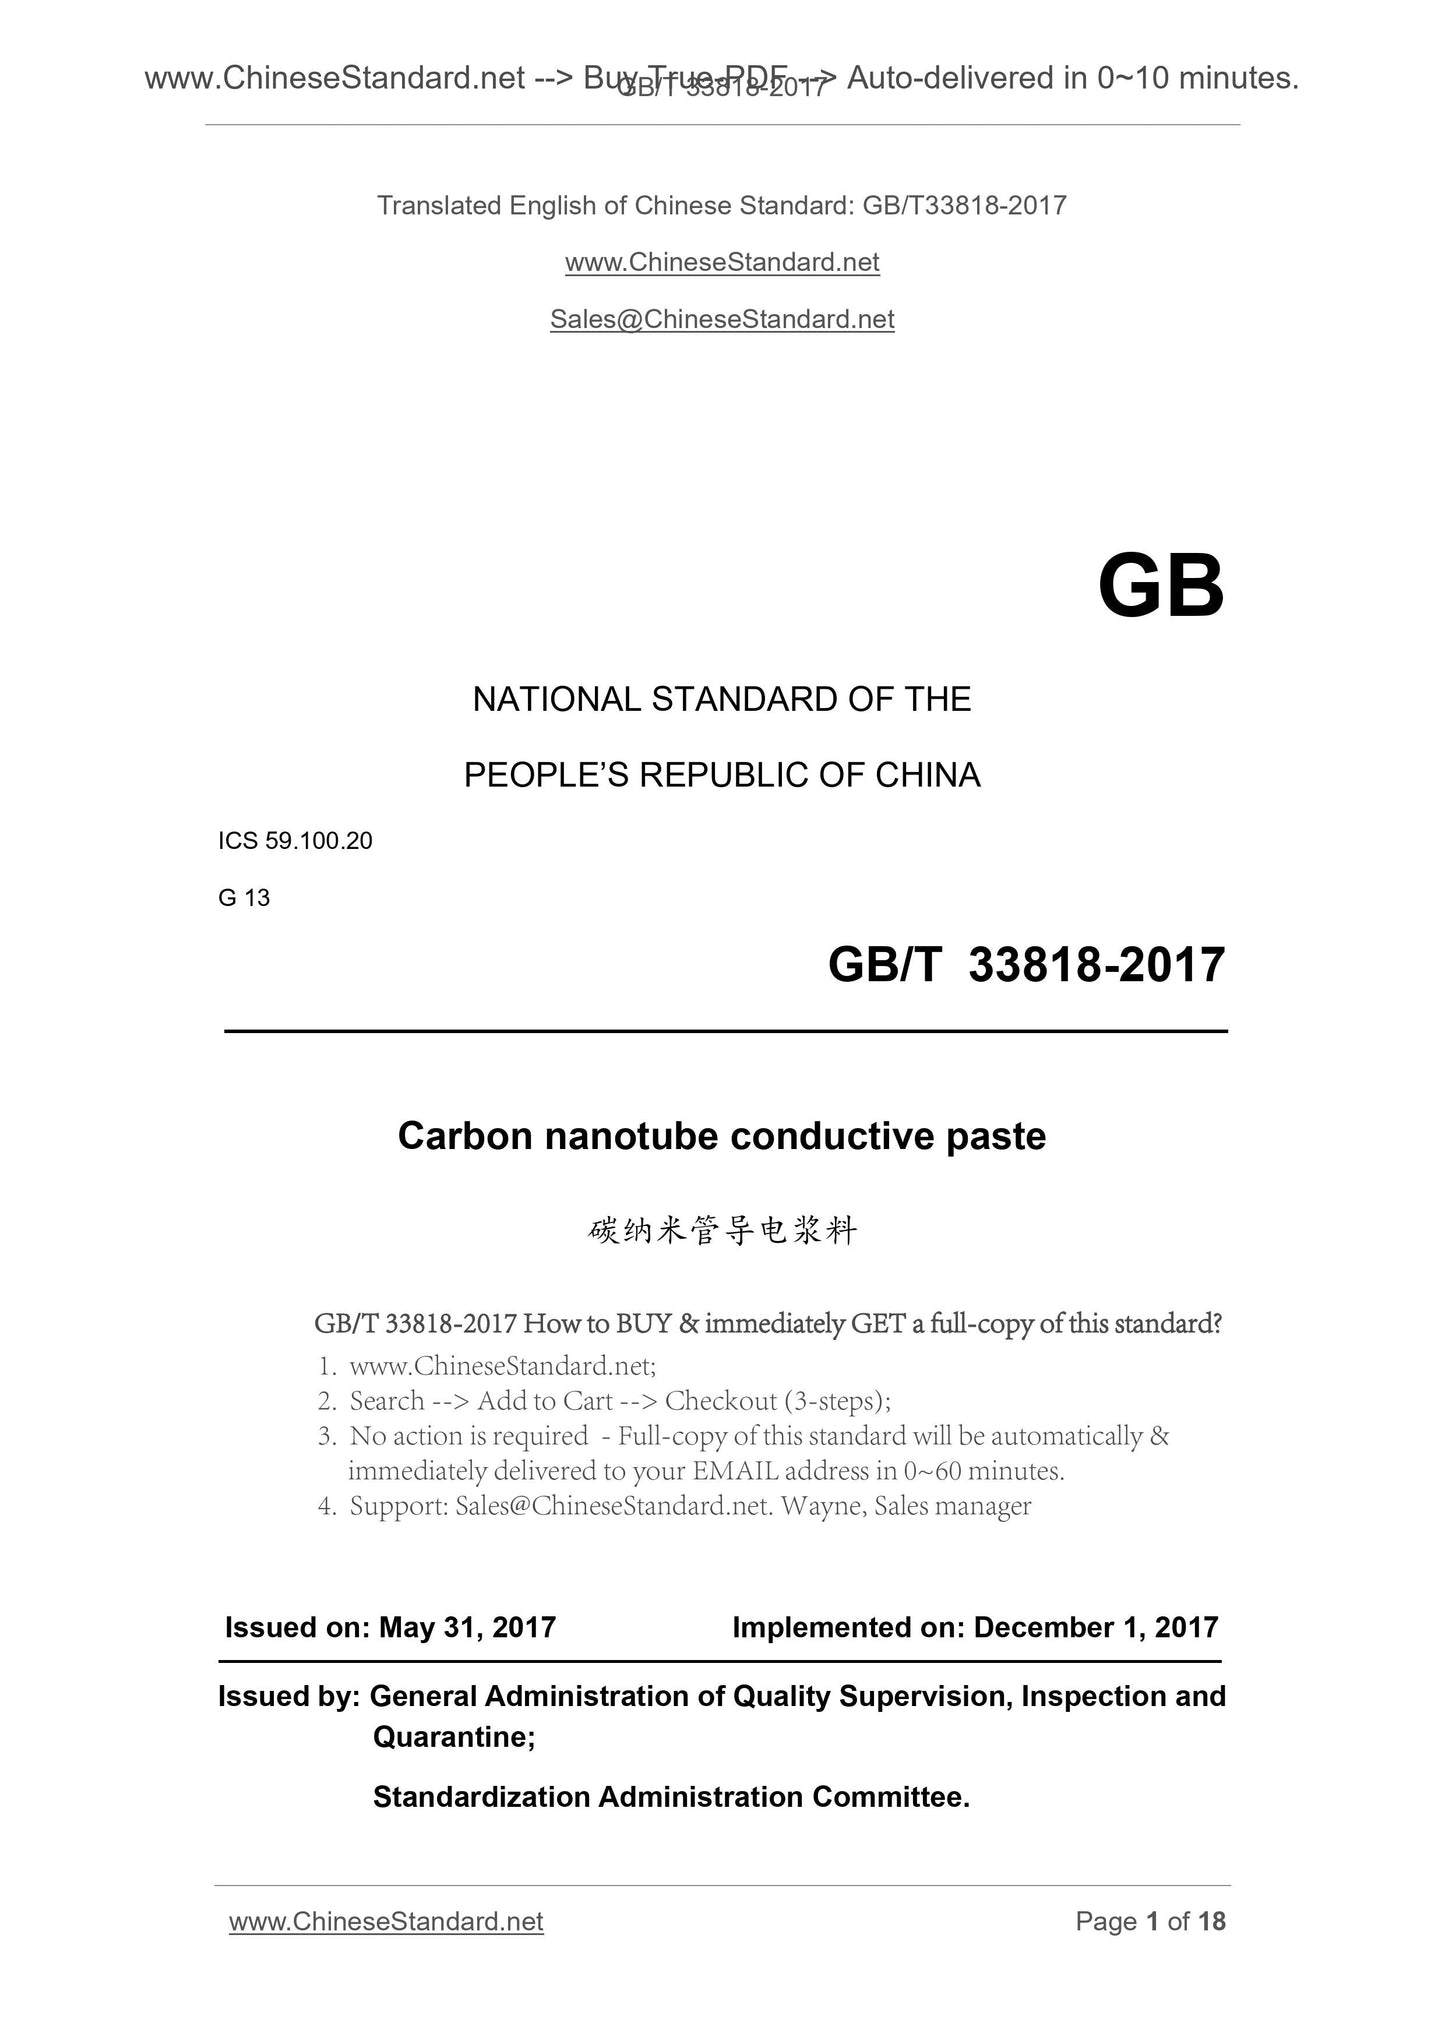 GB/T 33818-2017 Page 1